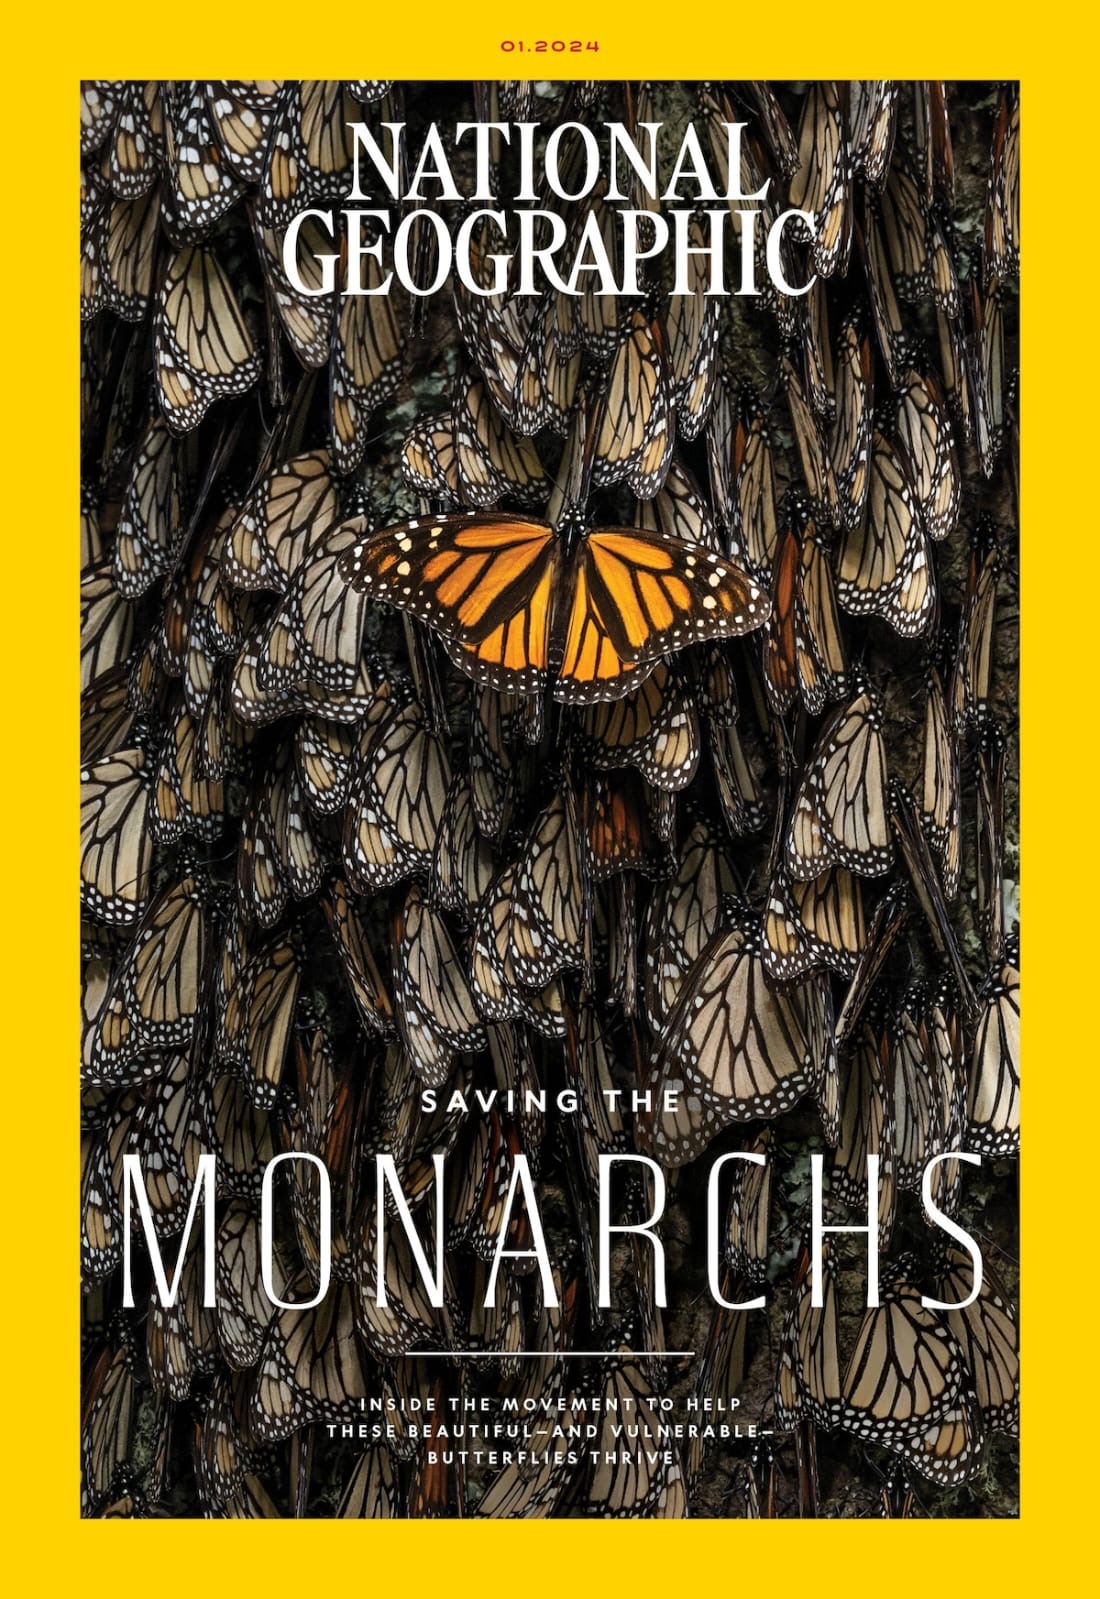 National Geographic "Saving the Monarchs"